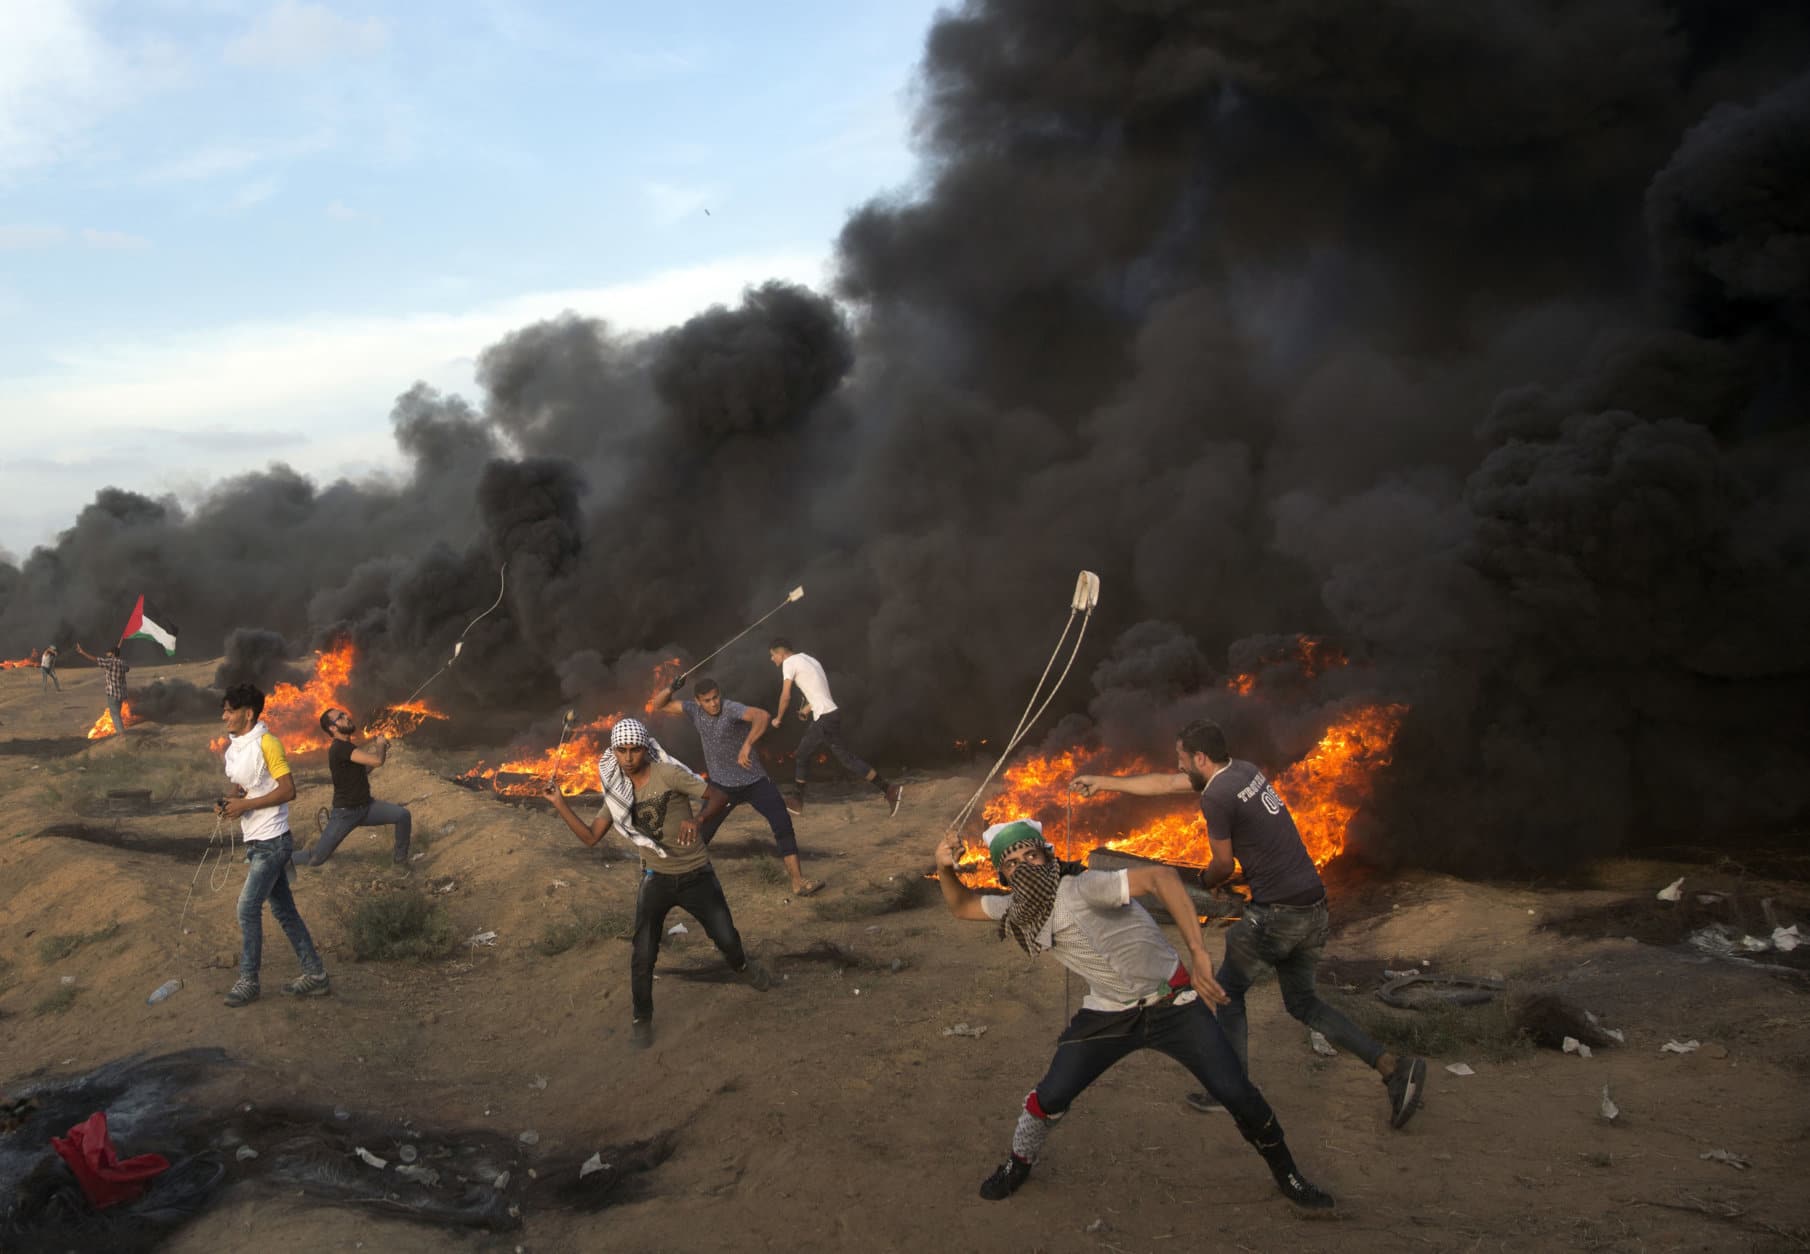 Palestinians hurl stones during a protest at the Gaza Strip's border with Israel on Oct. 5, 2018. (AP Photo/Khalil Hamra)